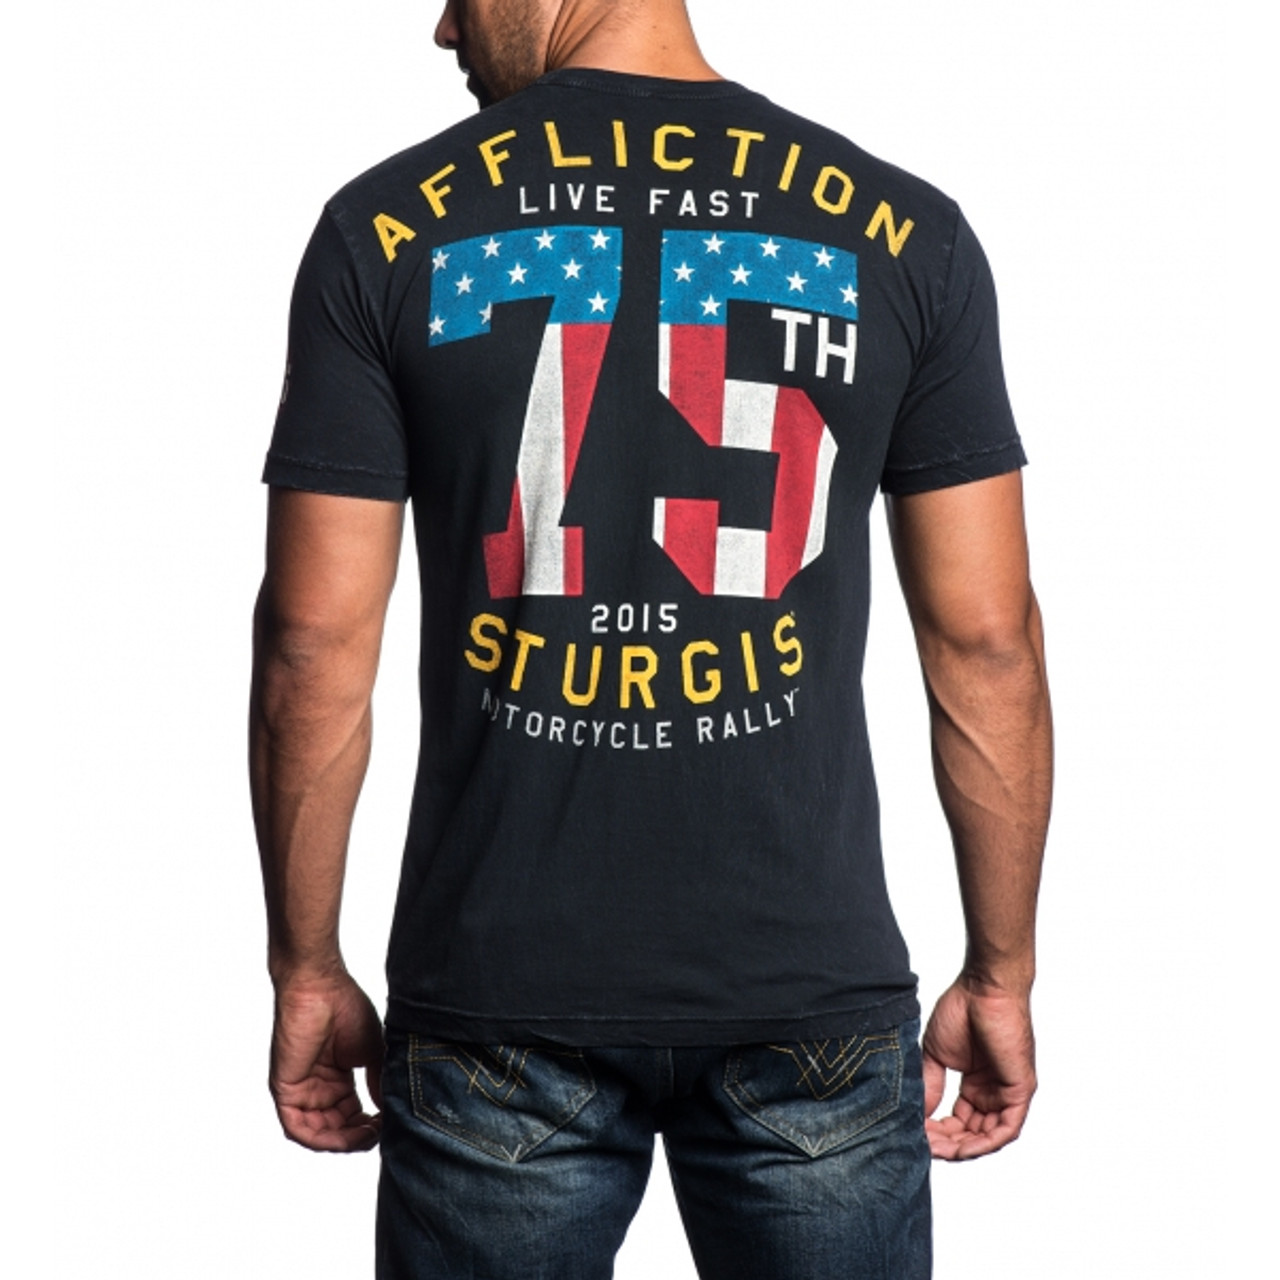 Indian Motorcycle Sturgis Shop Shirt - Black with Cream Stitching - Sturgis  Live